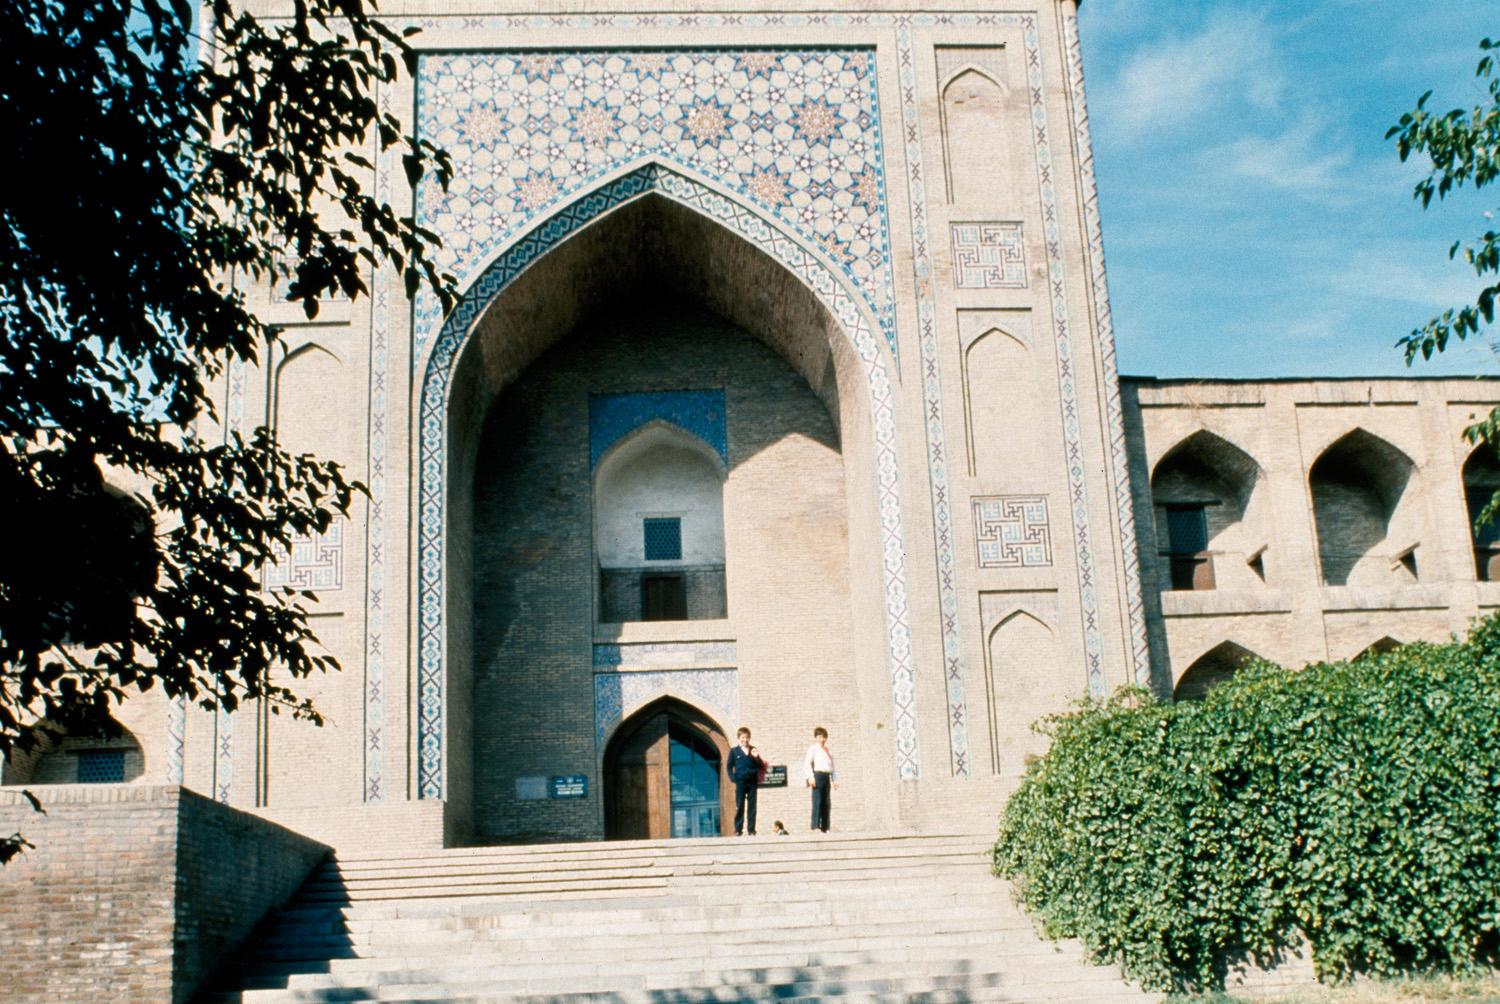 Exterior view of iwan on entry façade